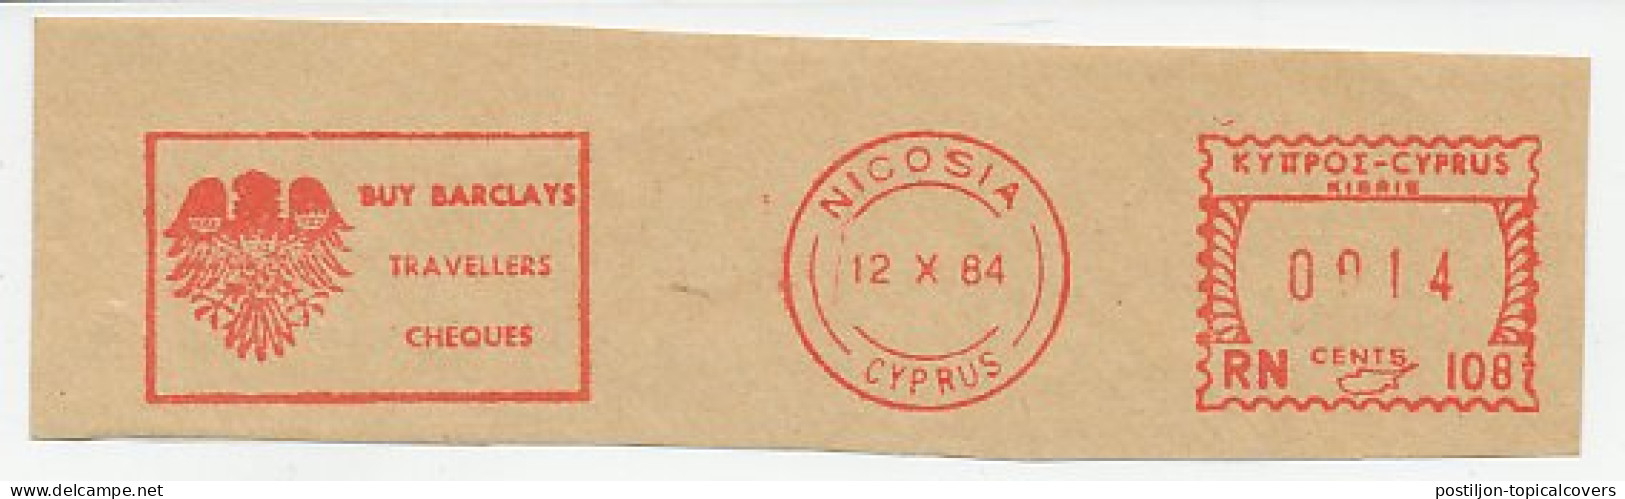 Meter Cut Cyprus 1984 Travellers Cheques - Barclays - Ohne Zuordnung